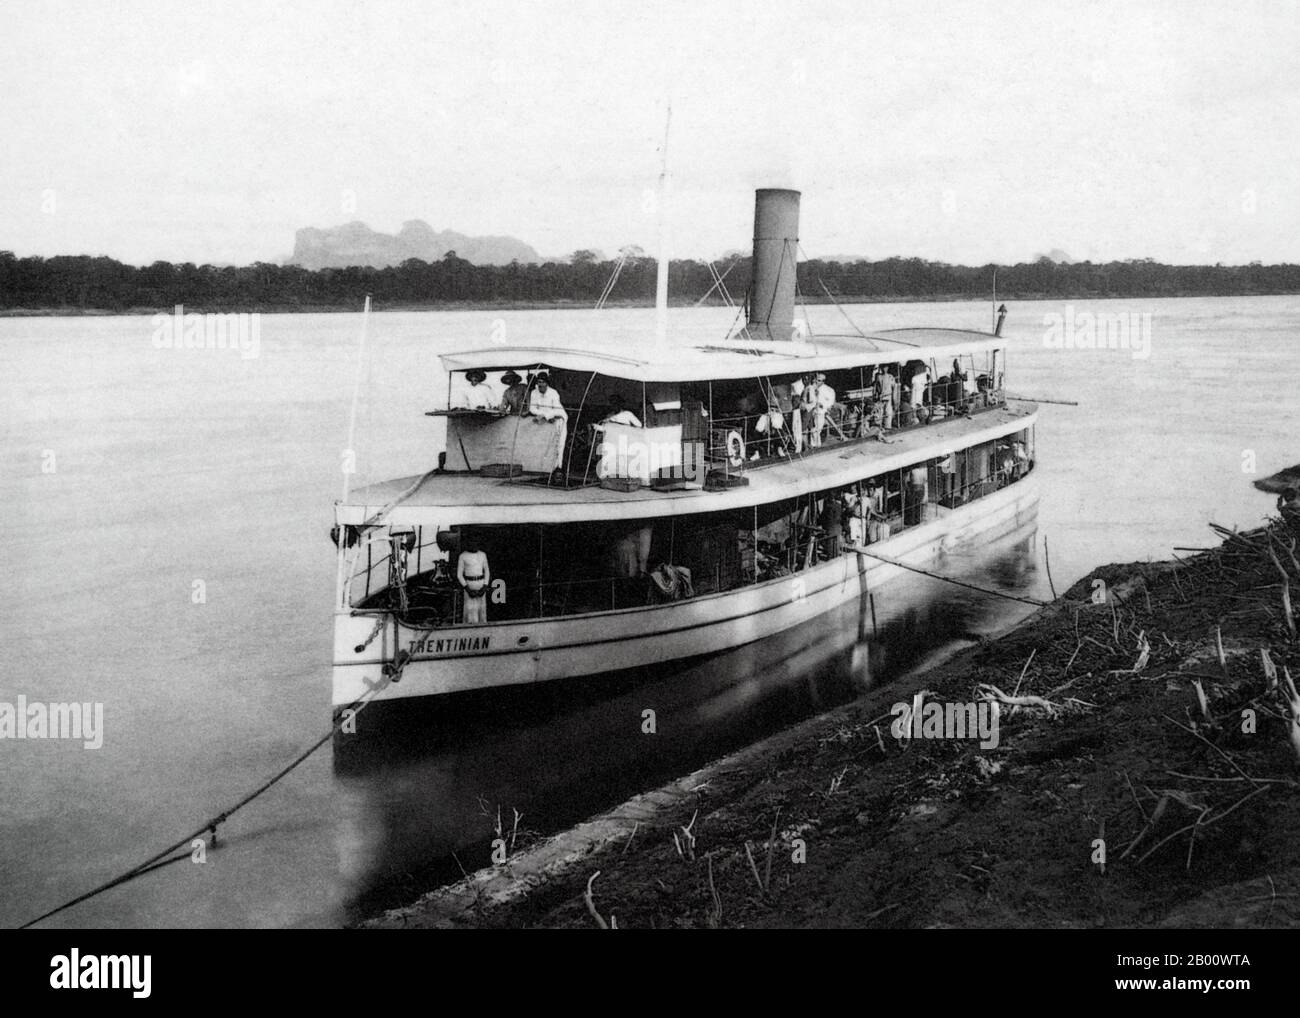 Laos: The launch of the steam-powered ‘Le Trentinian’ in 1897. The steamer operated a freight and passenger service between Vientiane and Savannakhet on the Mekong River.   Vientiane, formerly Sri Sattanak, was razed to the ground and looted by Siamese armies in 1827. The city was left in grave disrepair and became overgrown and nearly unpopulated until the French colonists arrived and took over the region in 1893. Vientiane became the capital of the French protectorate of Laos in 1899 and was rebuilt with renovated Buddhist temples surrounded by French architecture. Stock Photo